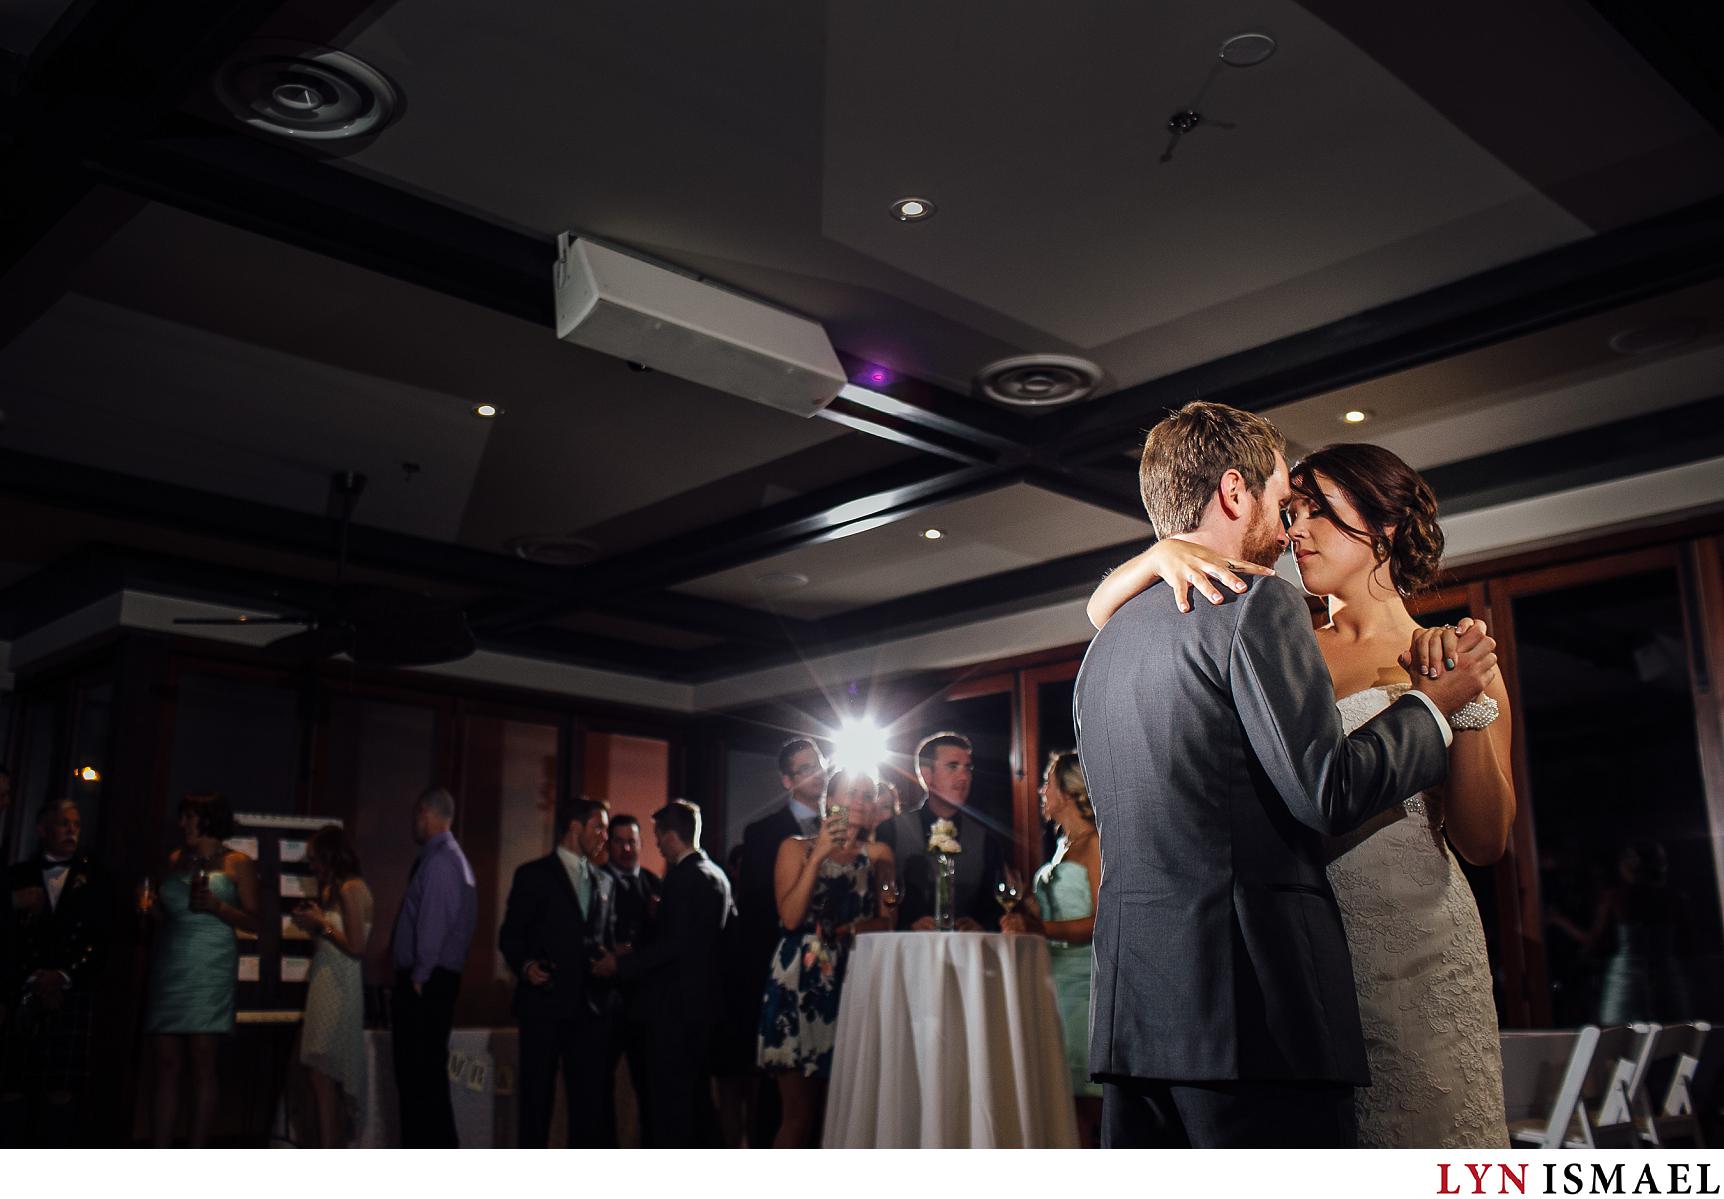 Waterloo region wedding photographer photographs a couple's first dance at Cambridge Mill